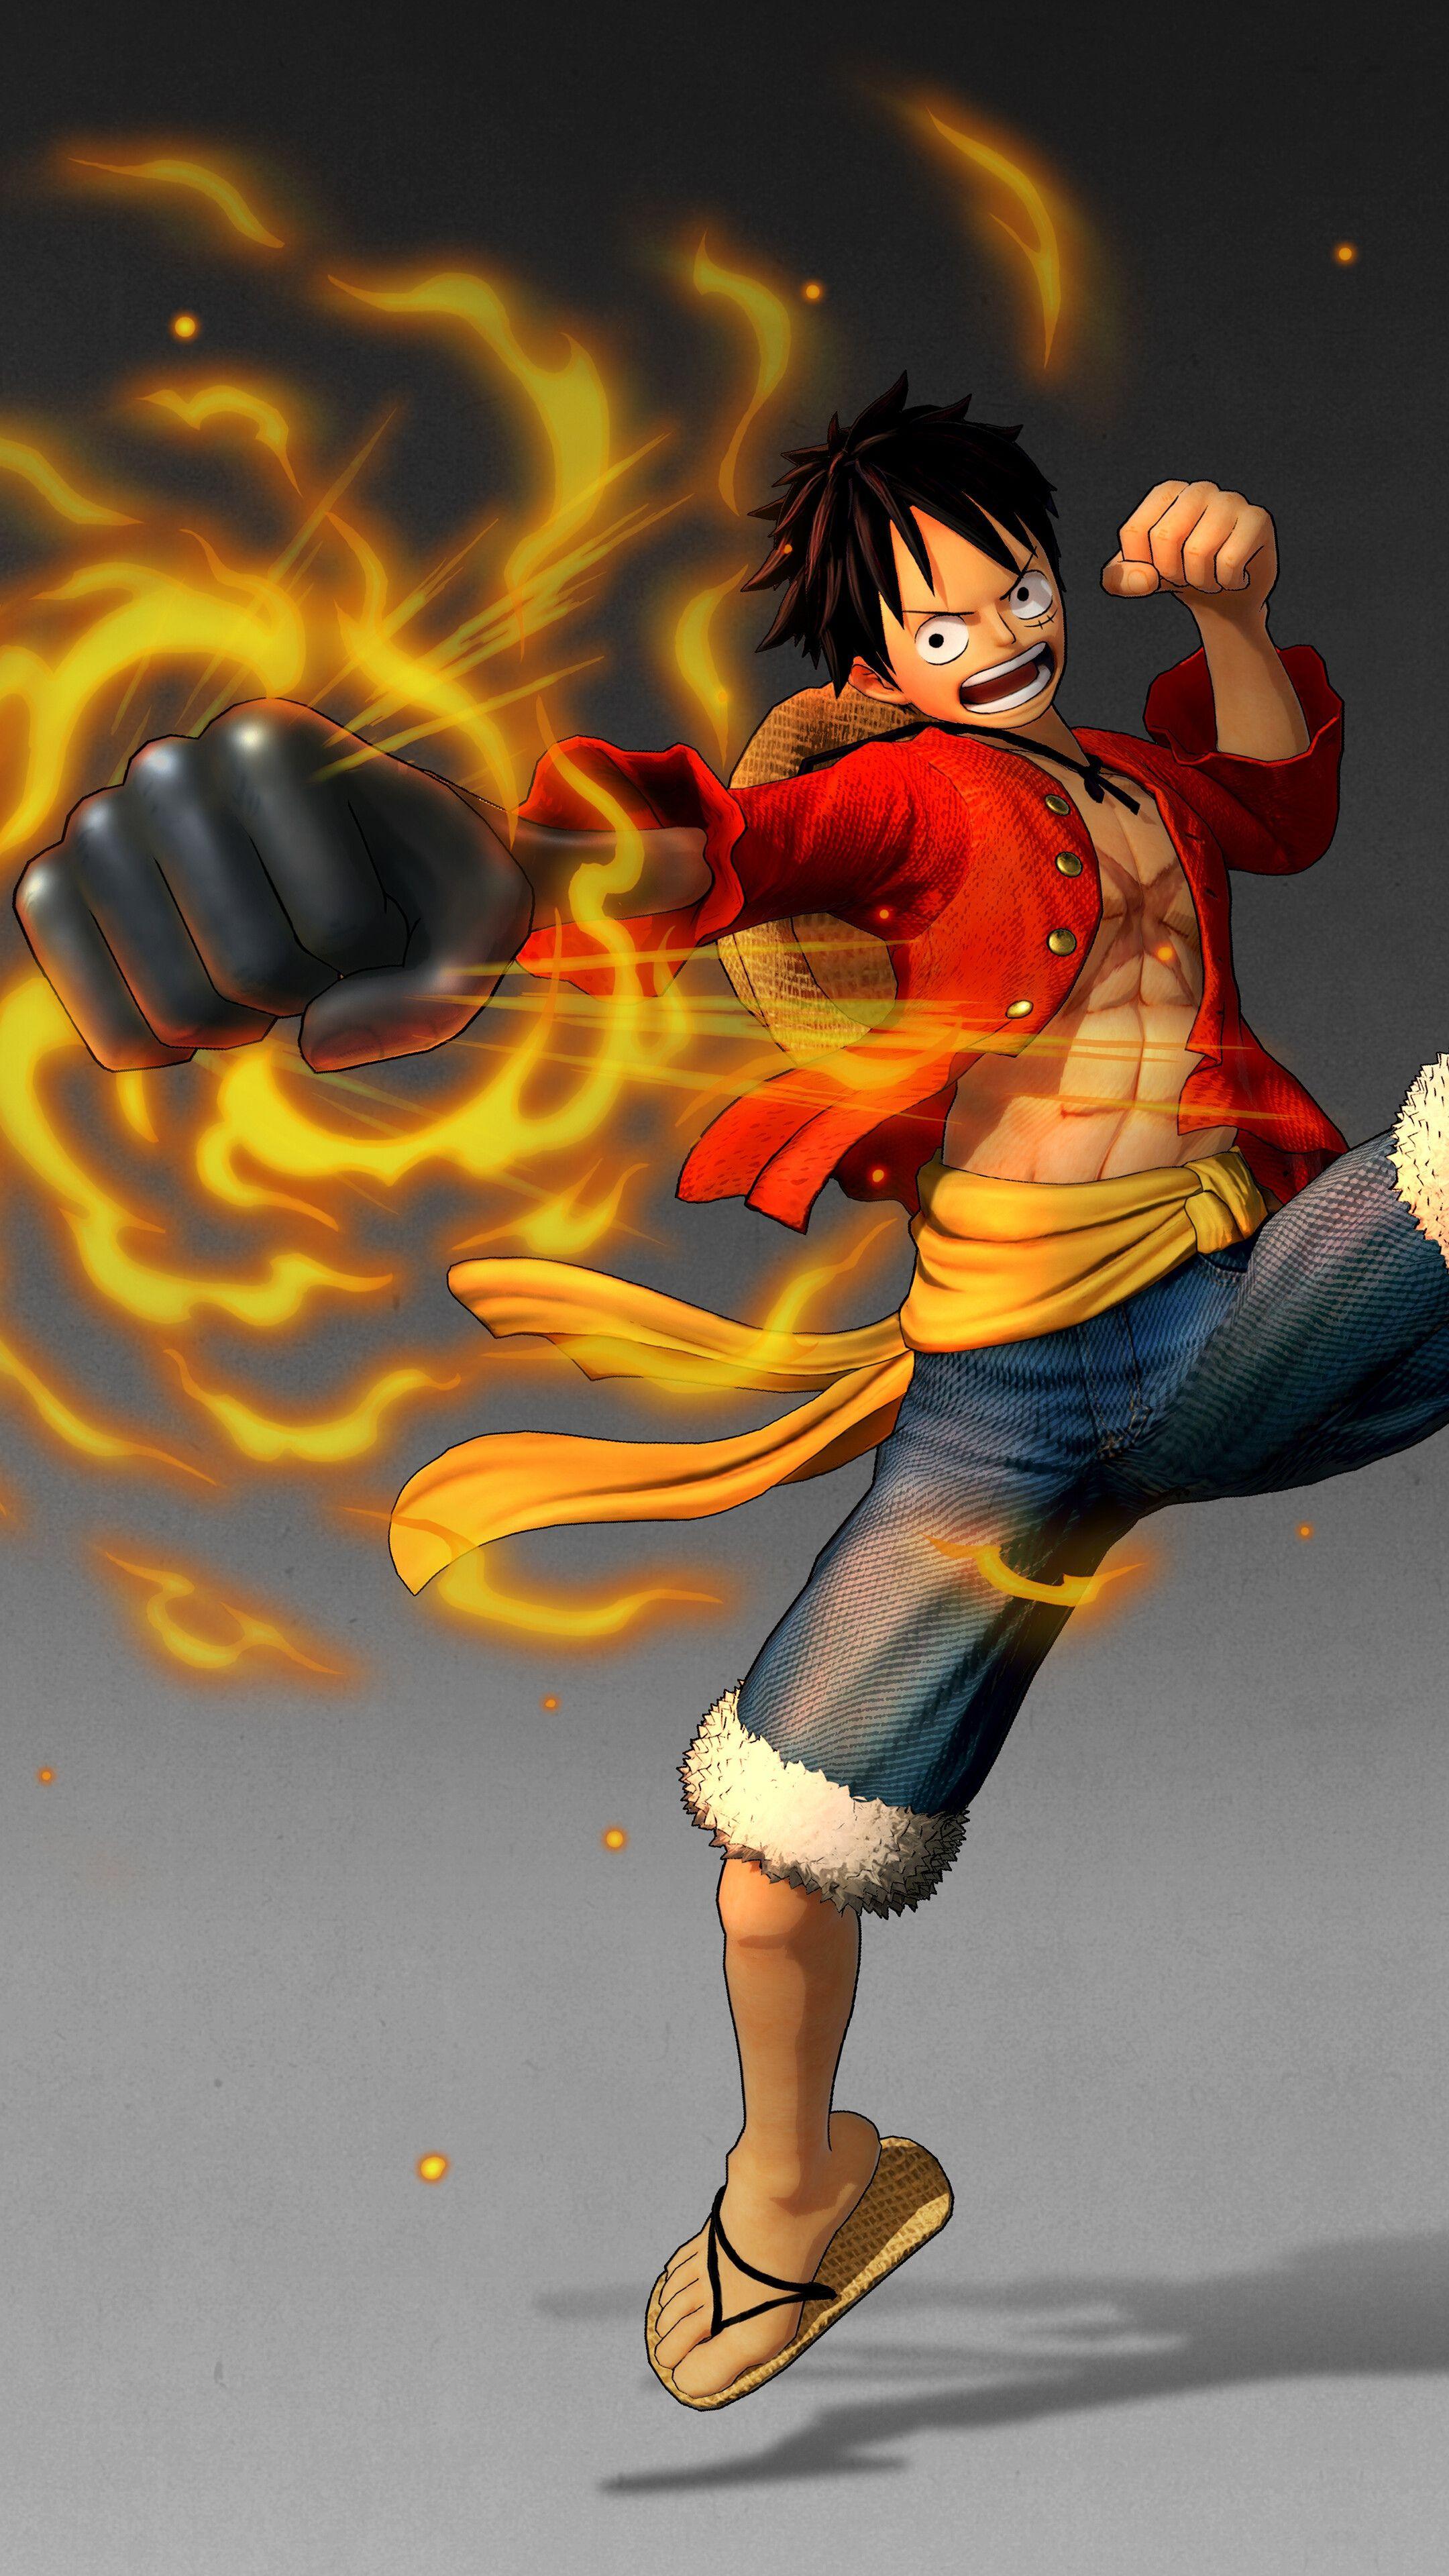 Luffy Gear 2 4k Phone Wallpapers - Wallpaper Cave C86